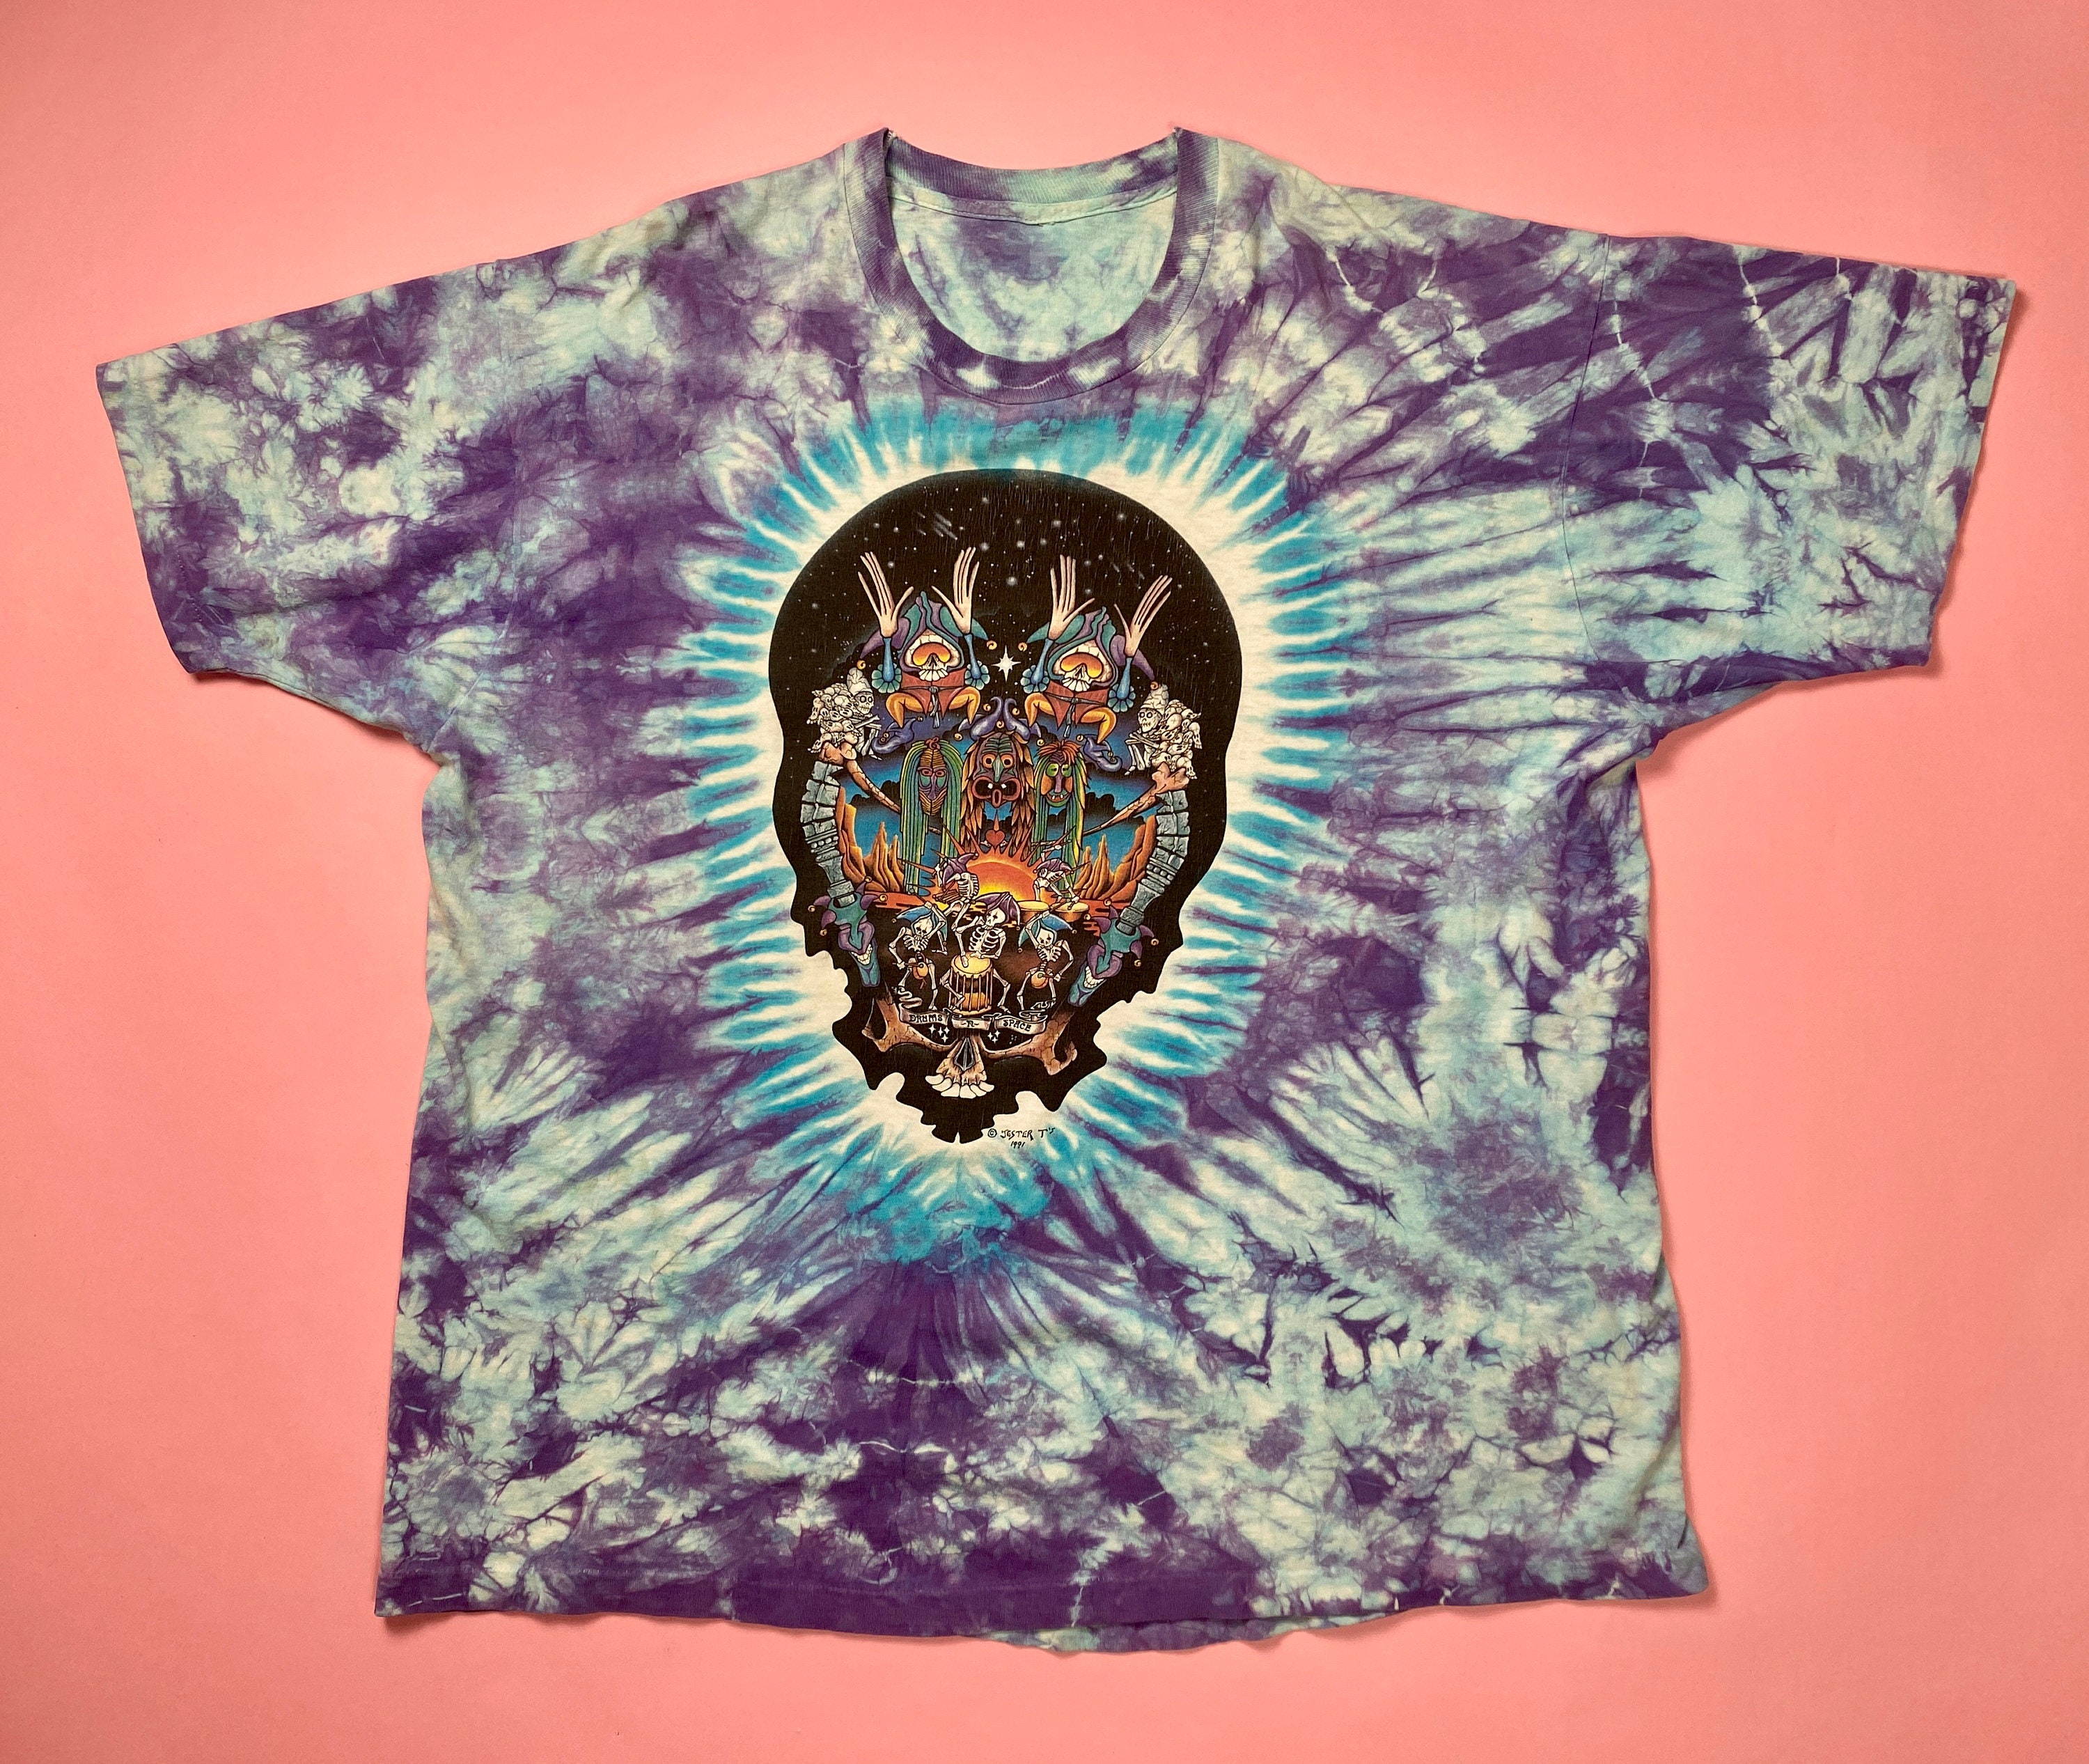 Vintage Grateful Dead Jester Tee  Urban Outfitters Singapore - Clothing,  Music, Home & Accessories